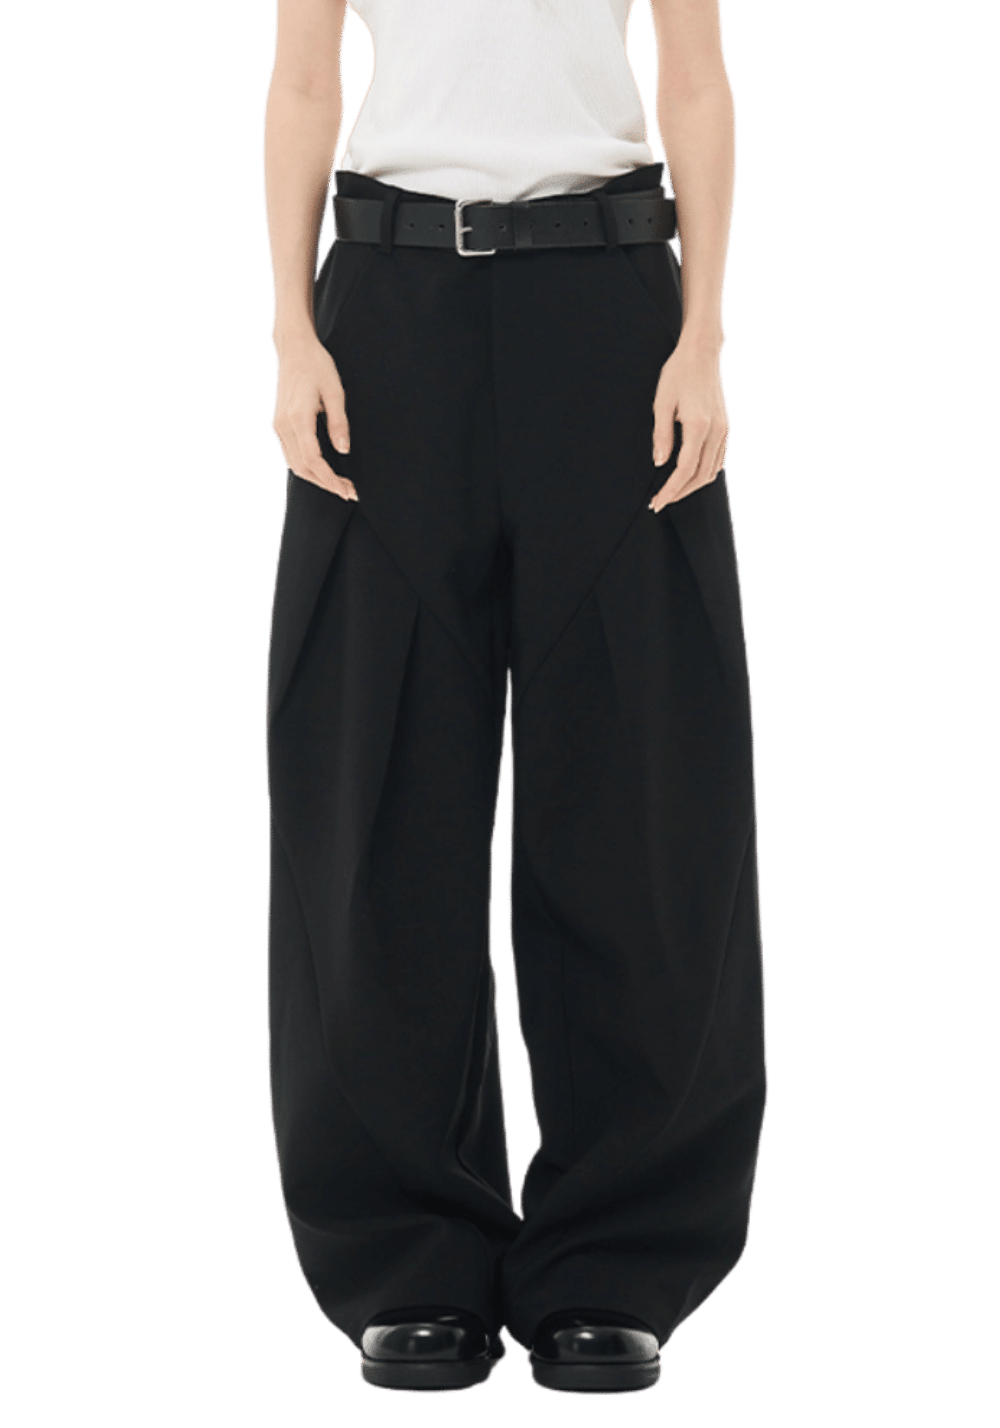 T-HOOD Men's Regular Fit Rayon Terylene Blend Solid Formal Urbane Grey  Trousers with Side Pockets